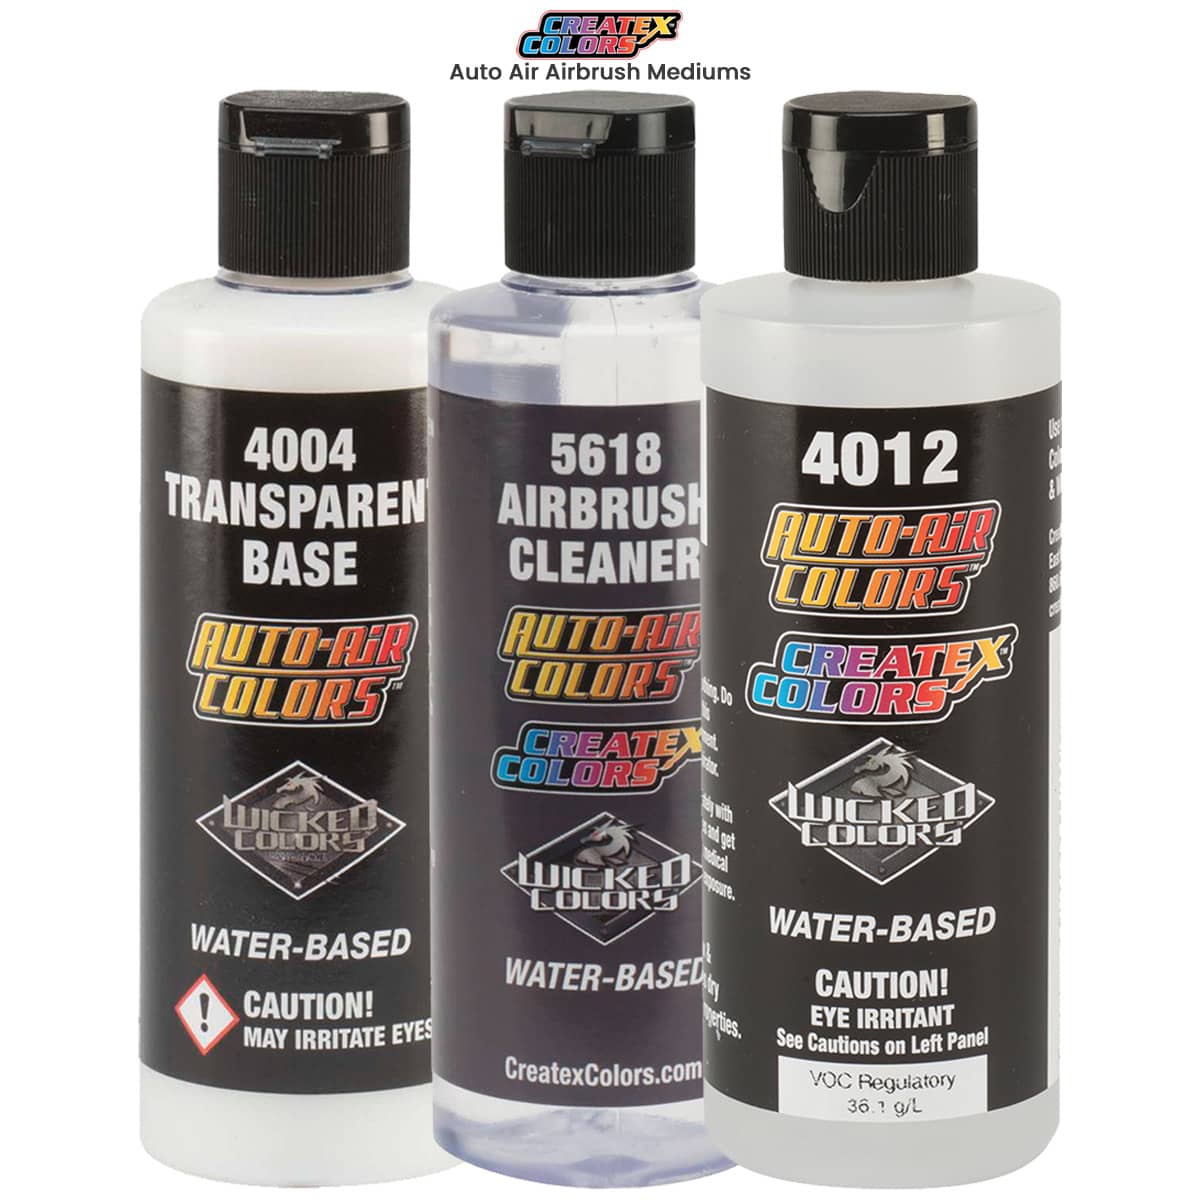 Airbrush Kit and Dual Fan Tank Air Compressor, Wicked 12 Color